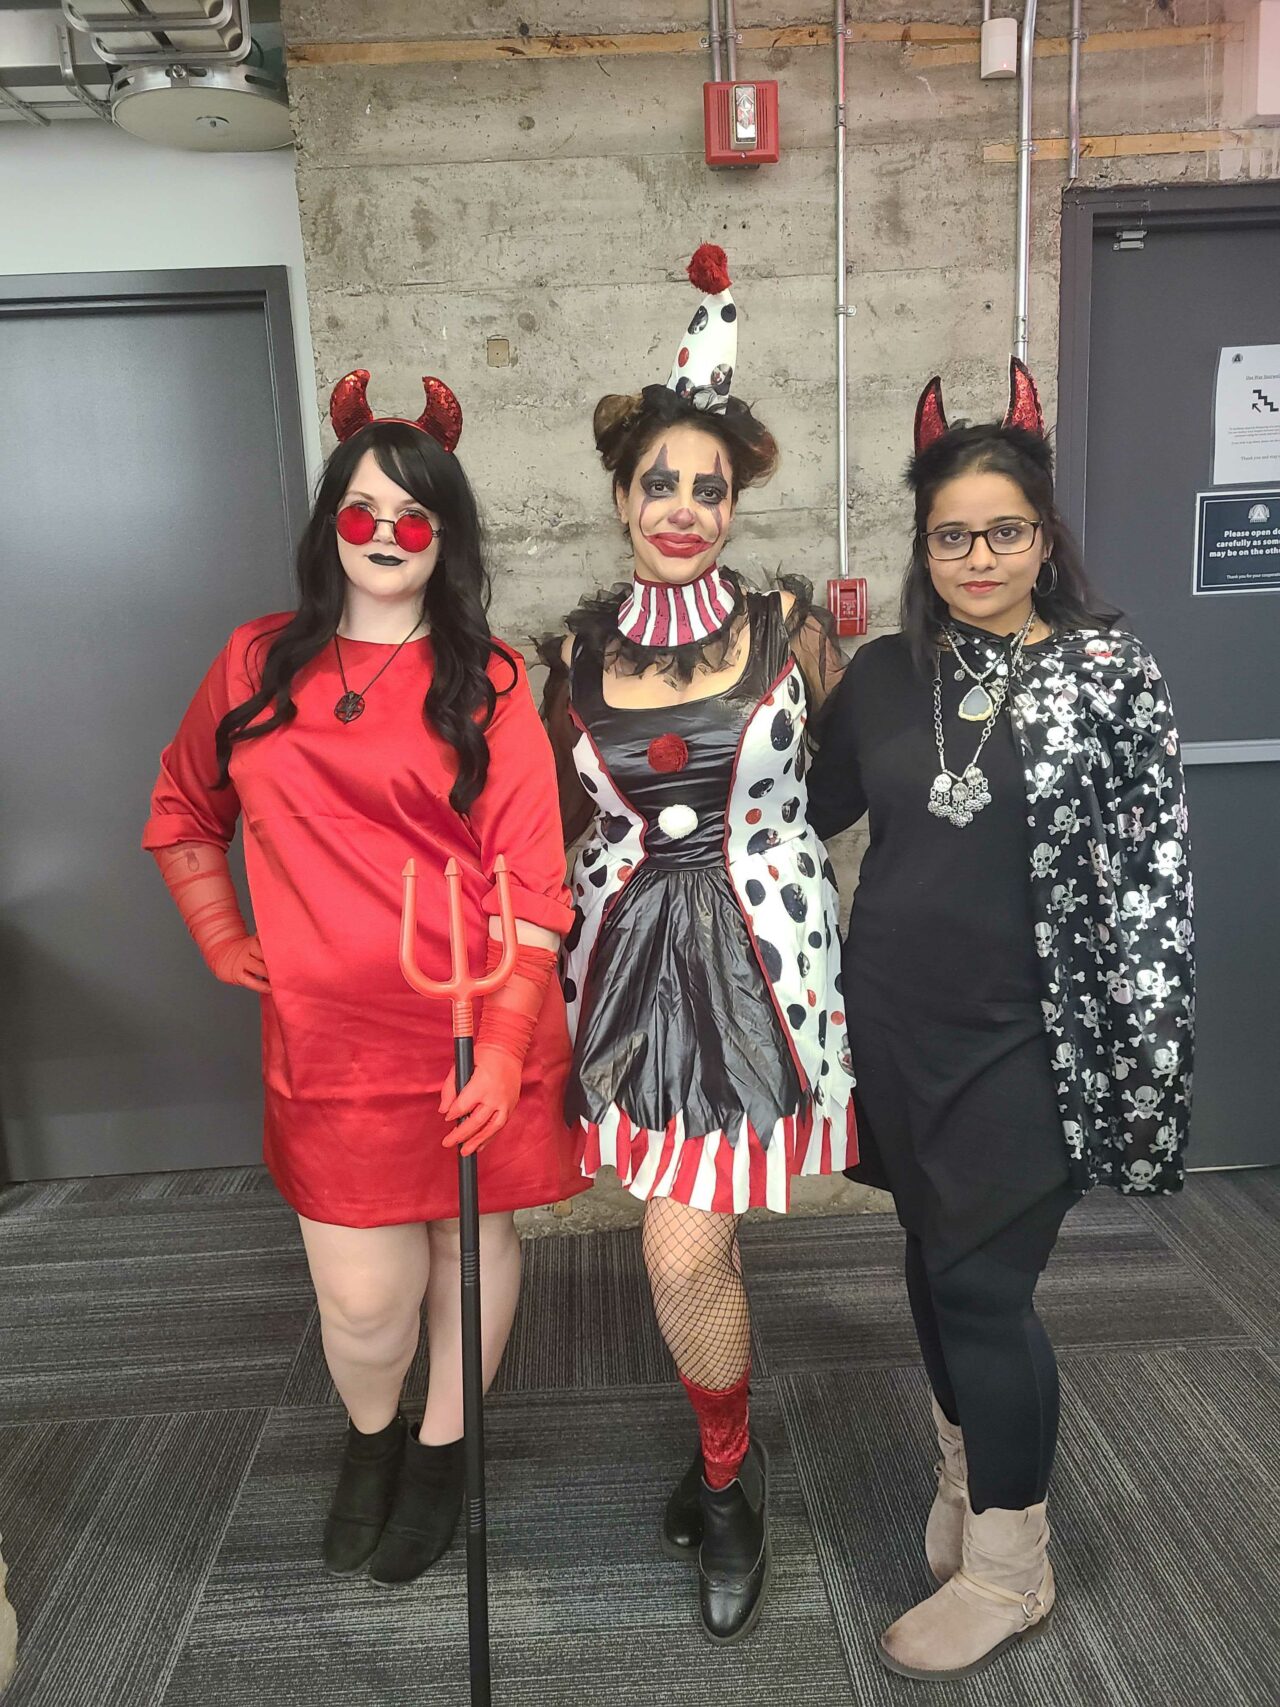 Three women Virtual Gurus staff members dressed up for Halloween one as a clown and two as devils.